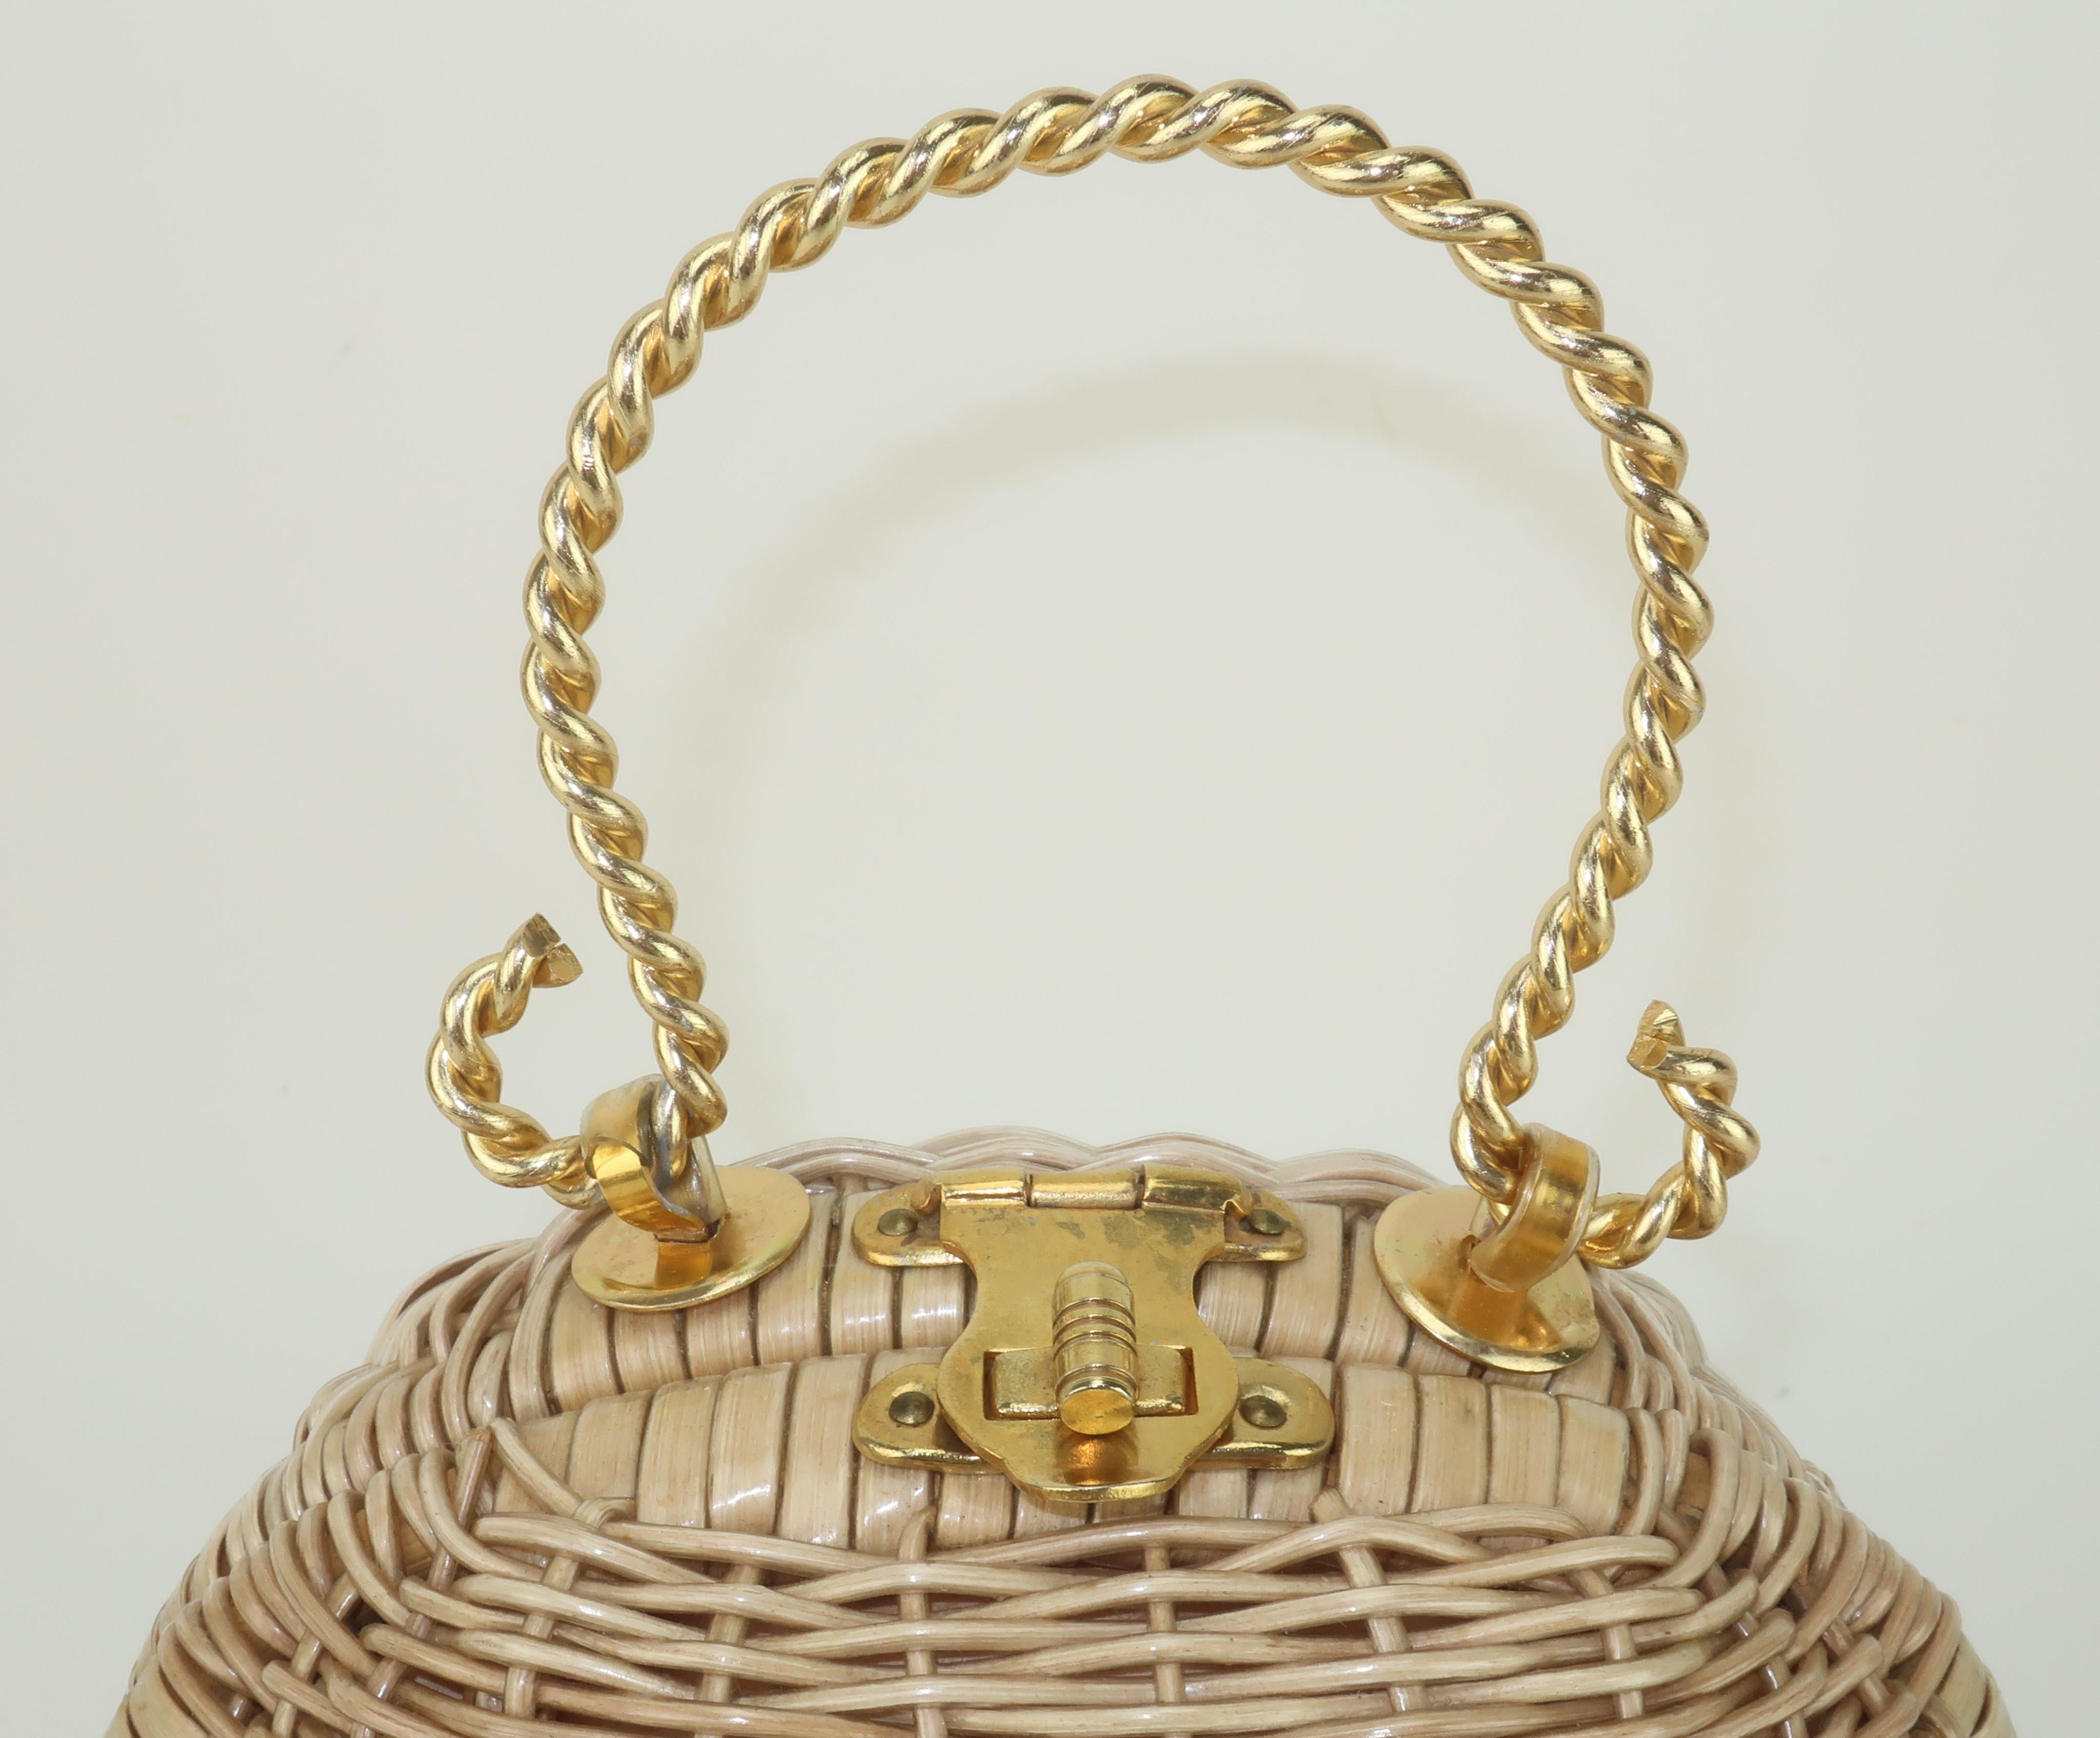 Wicker Ball Shaped Handbag With Gold Handle, 1960's For Sale 1